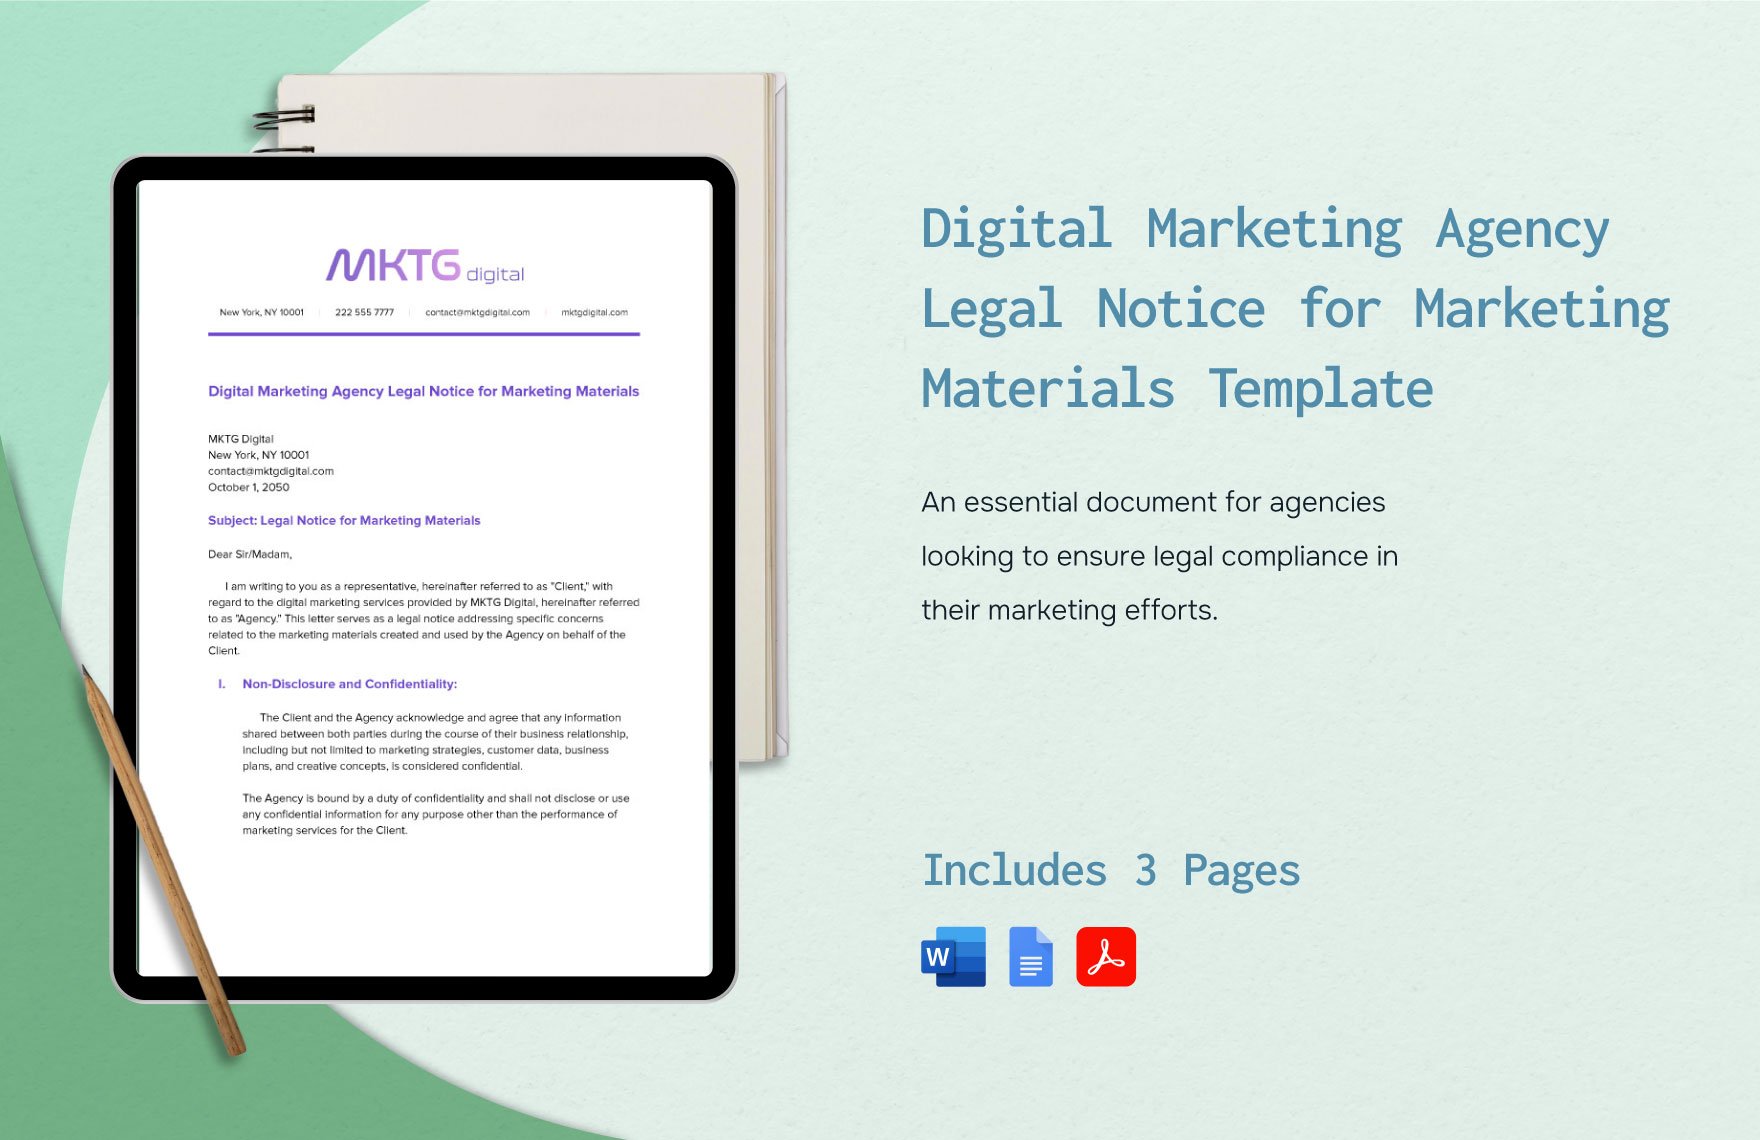 Digital Marketing Agency Legal Notice for Marketing Materials Template